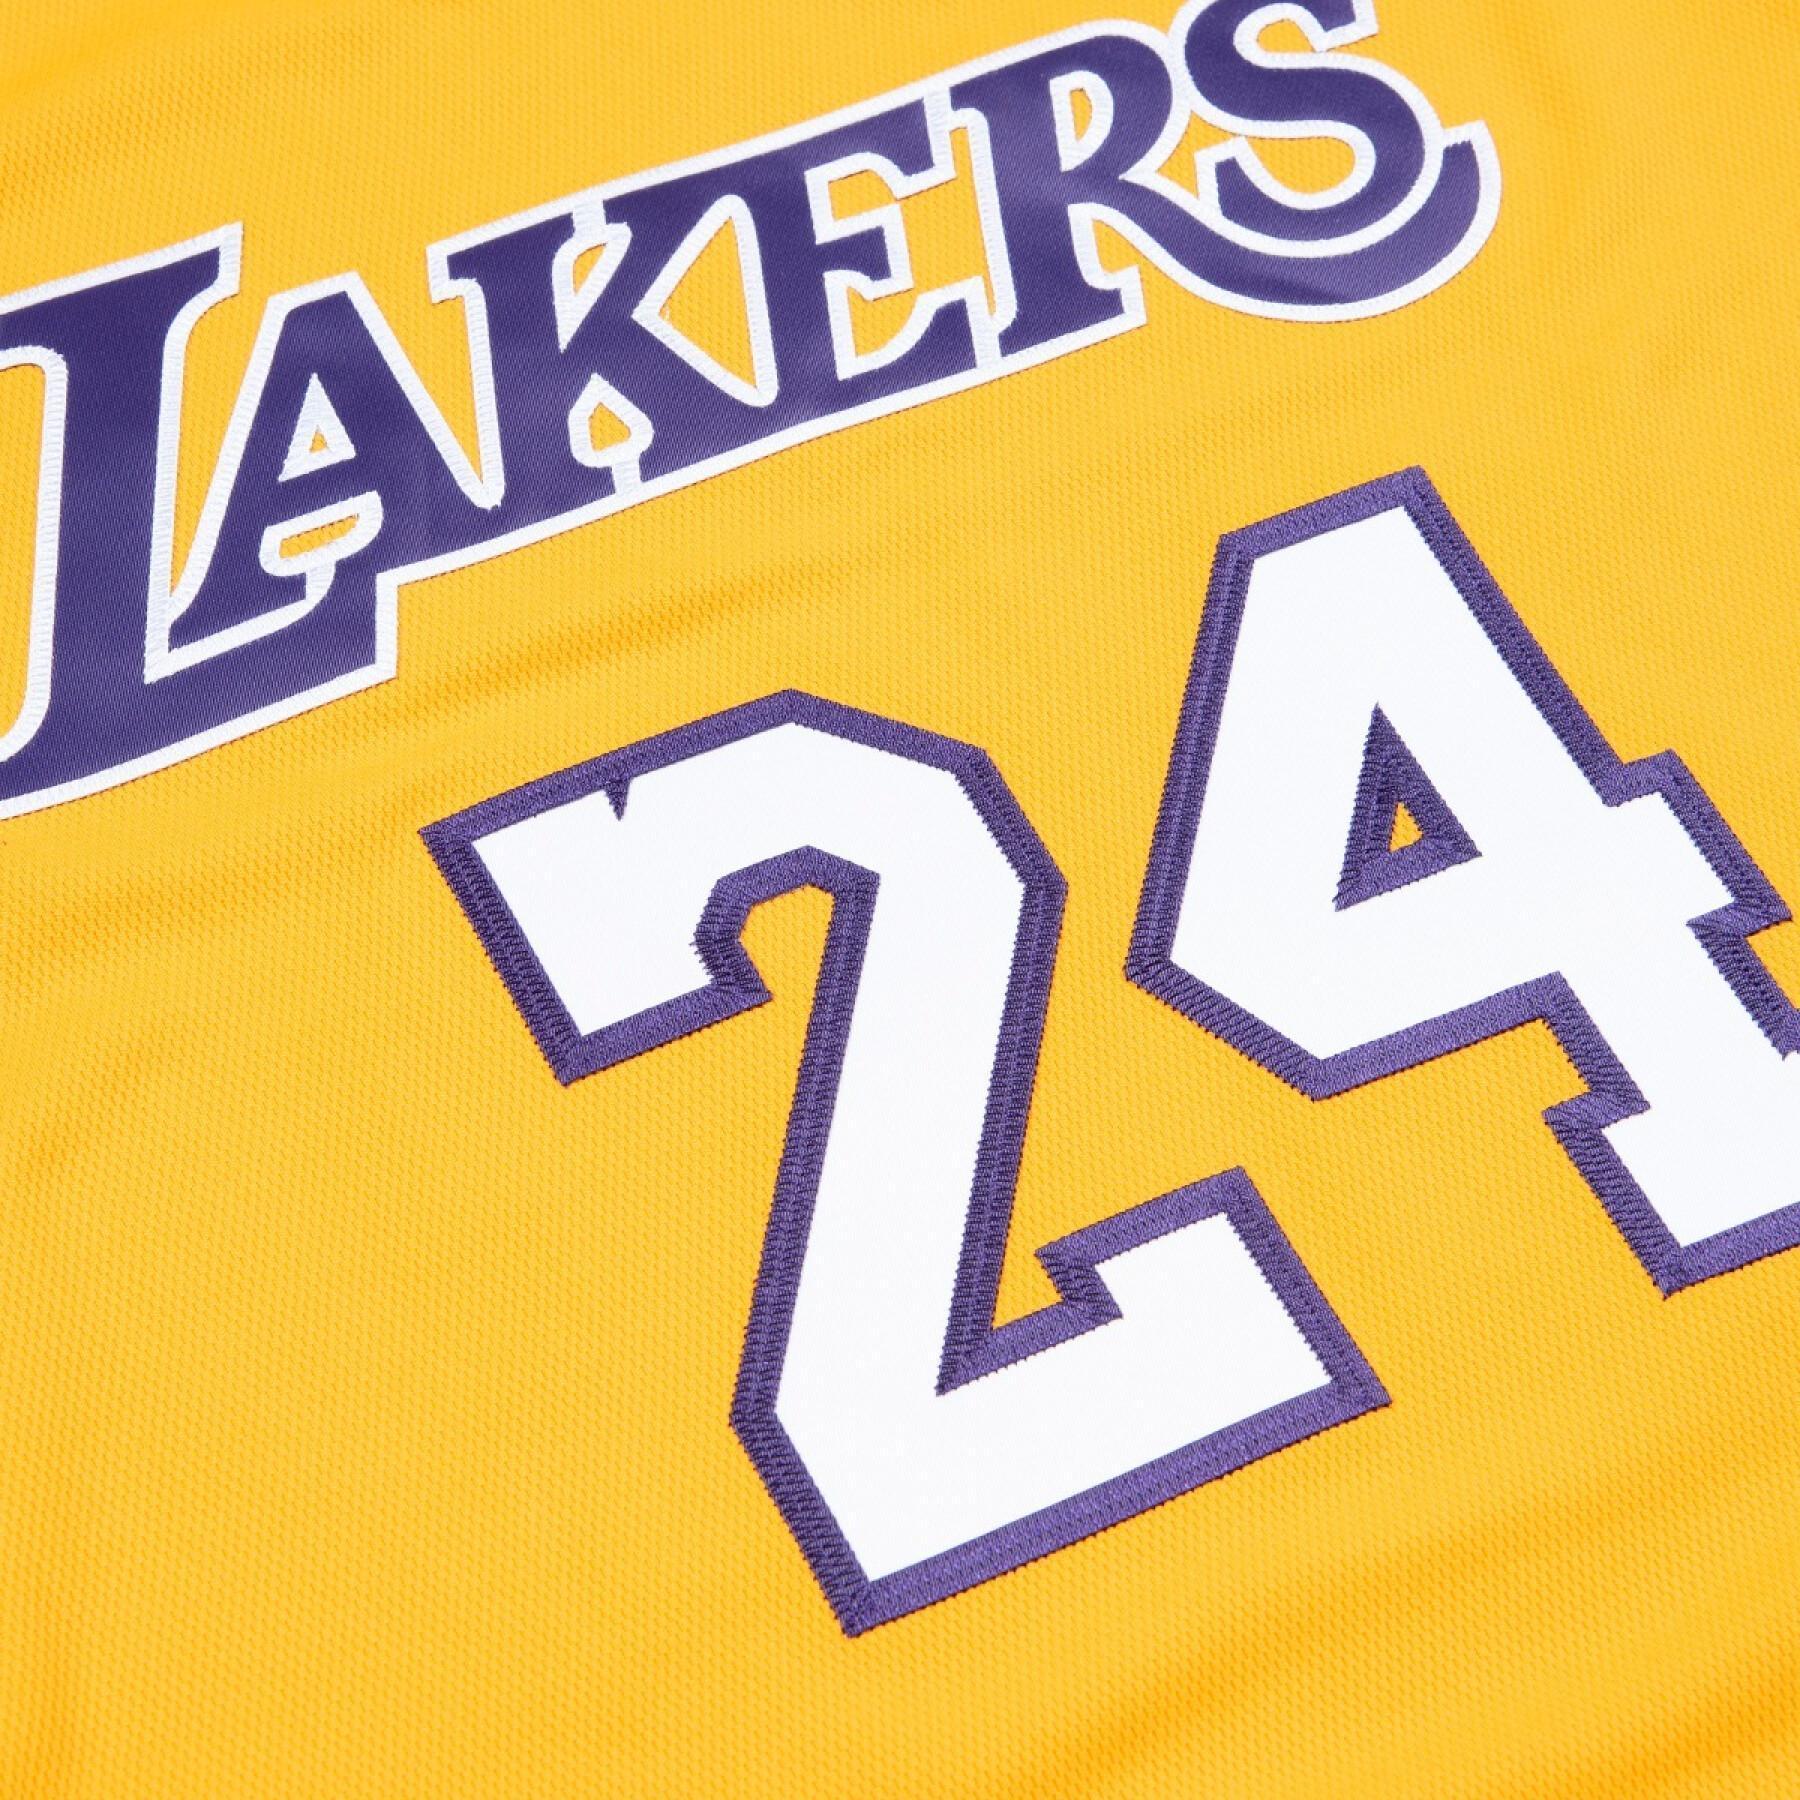 Jersey Los Angeles Lakers NBA Authentic Kobe Bryant